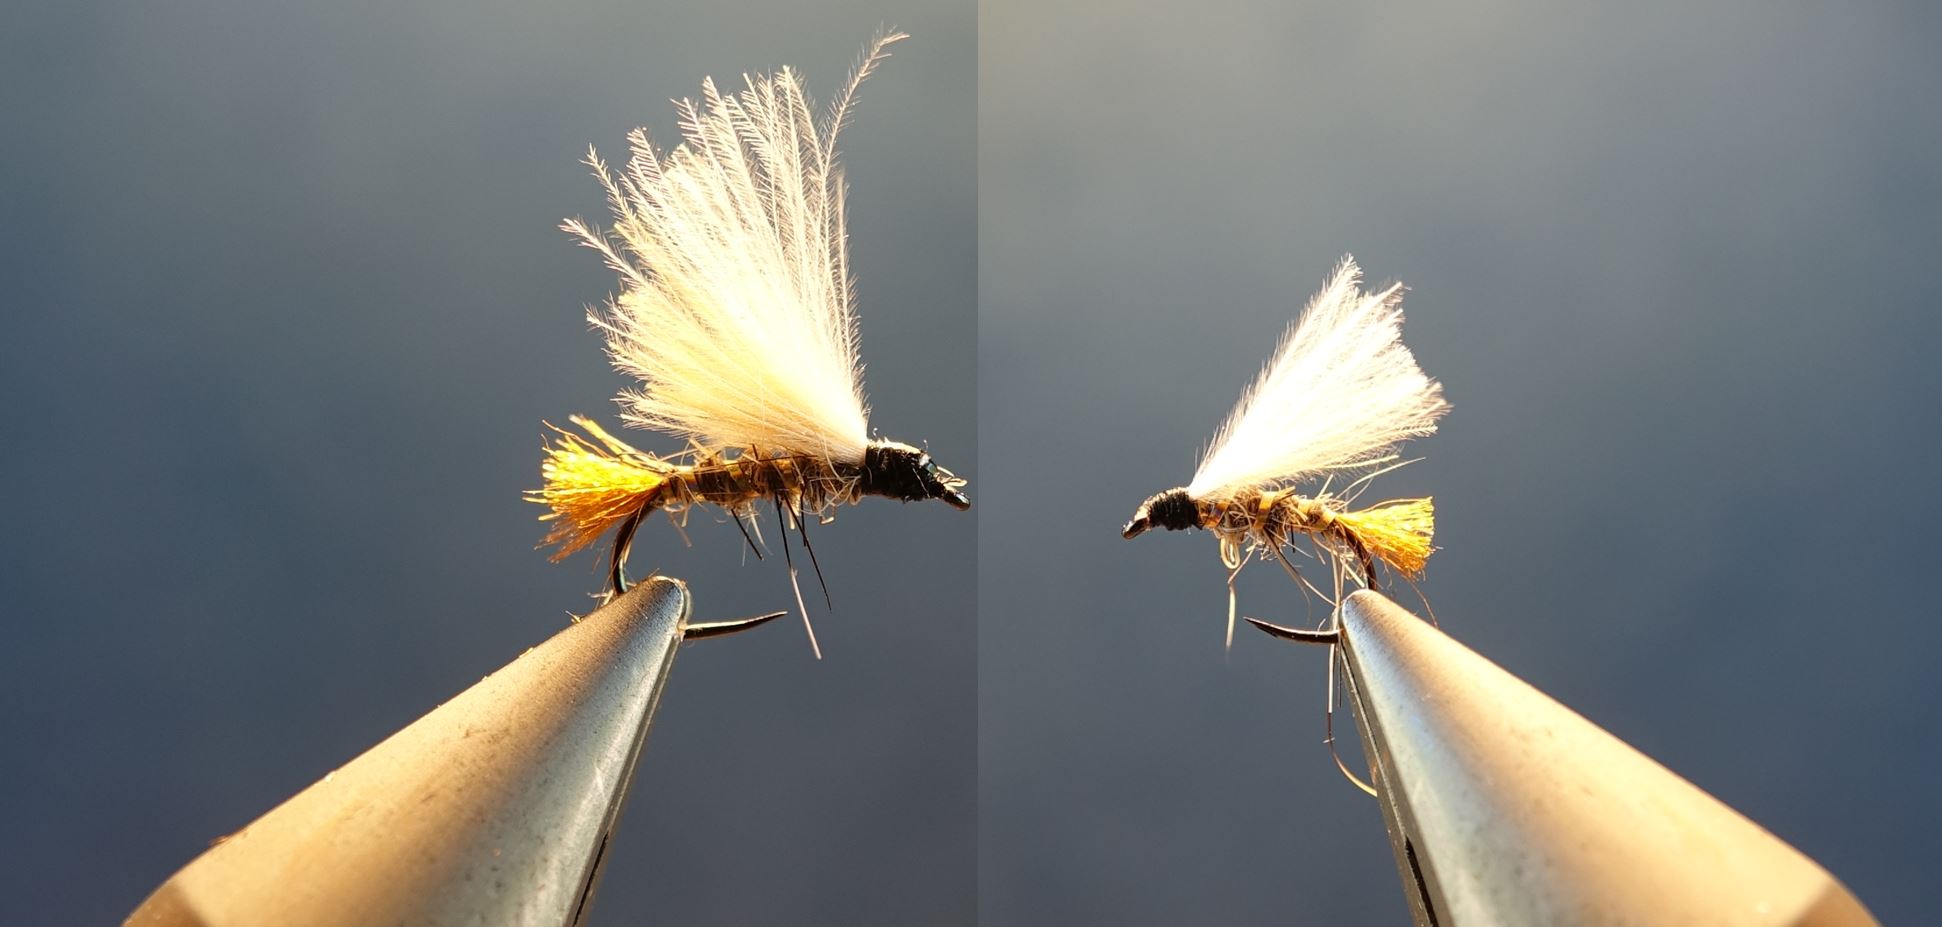 JBE JBE emergente mouche fly flytying lievre hare squirrel ecureuil CDC eclosion